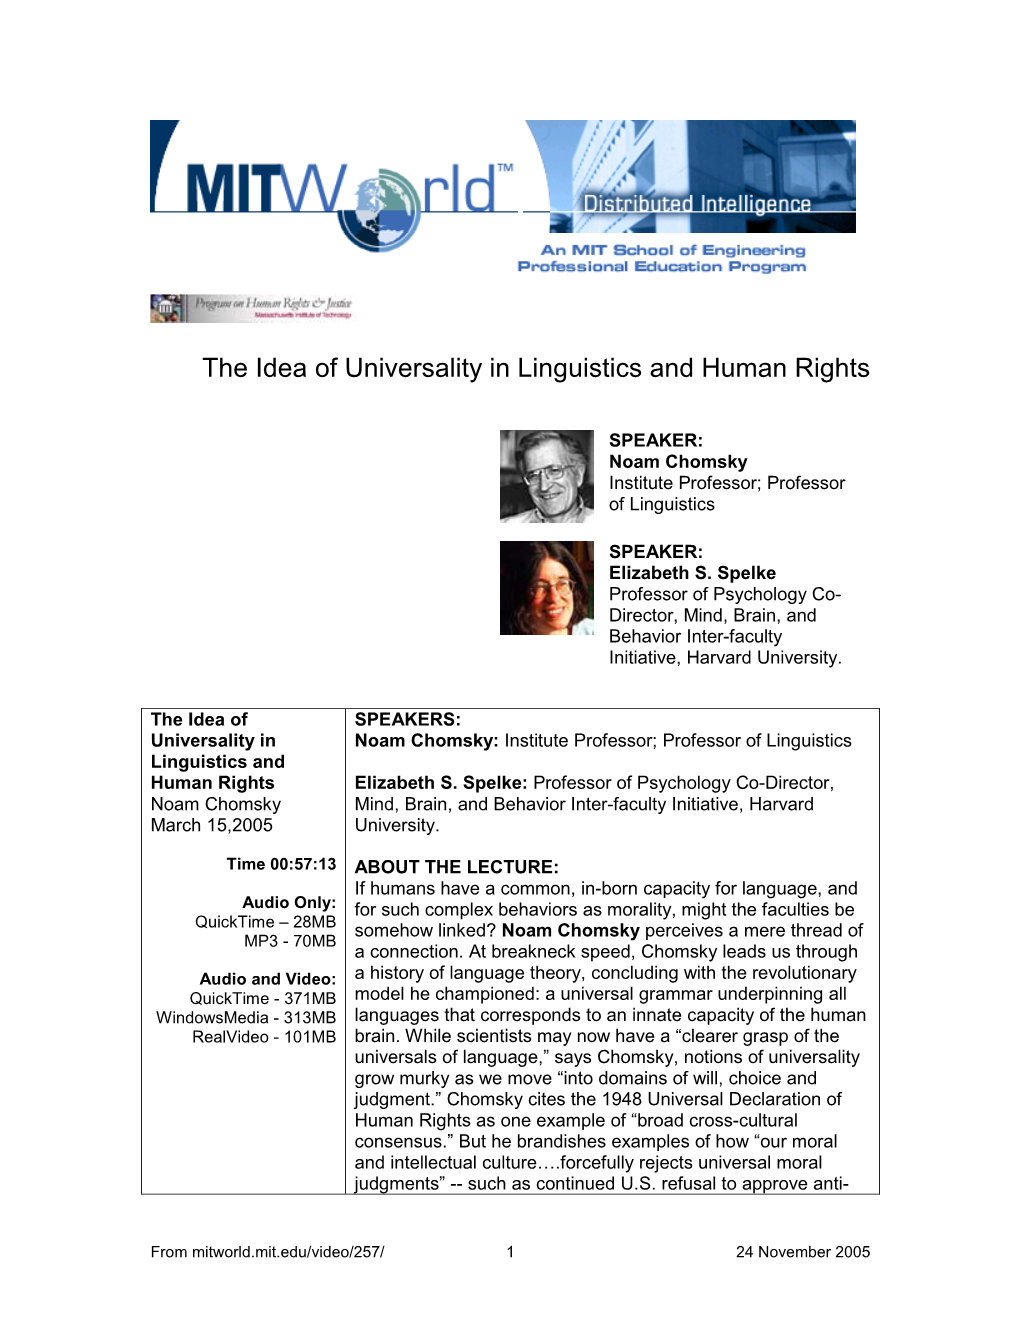 The Idea of Universality in Linguistics and Human Rights